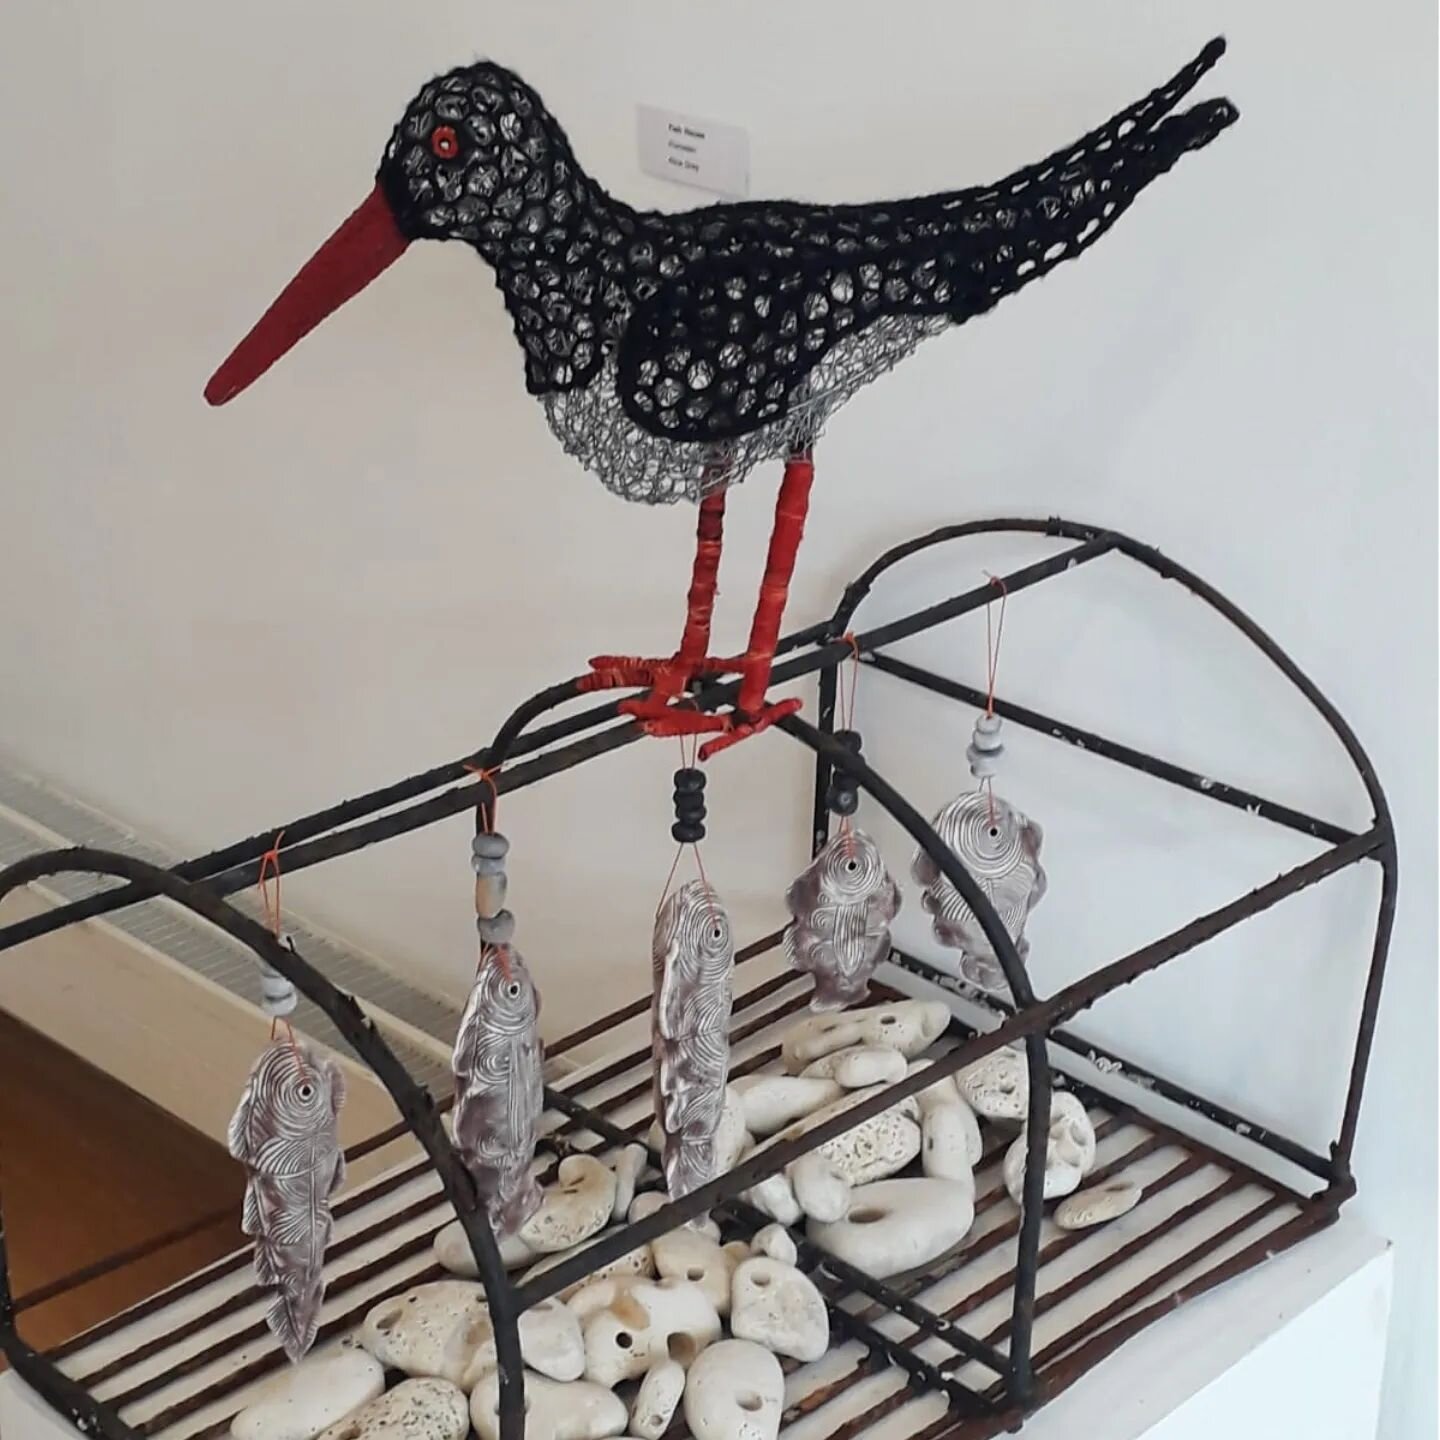 We have a new visitor in our gallery, he has been exploring the wonderful works and cards in our Making Waves exhibition. The show featuring woven wire sculptures by @glynismakesthings, paintings by @helenhawkmoth and ceramics by @selkie_arts is open